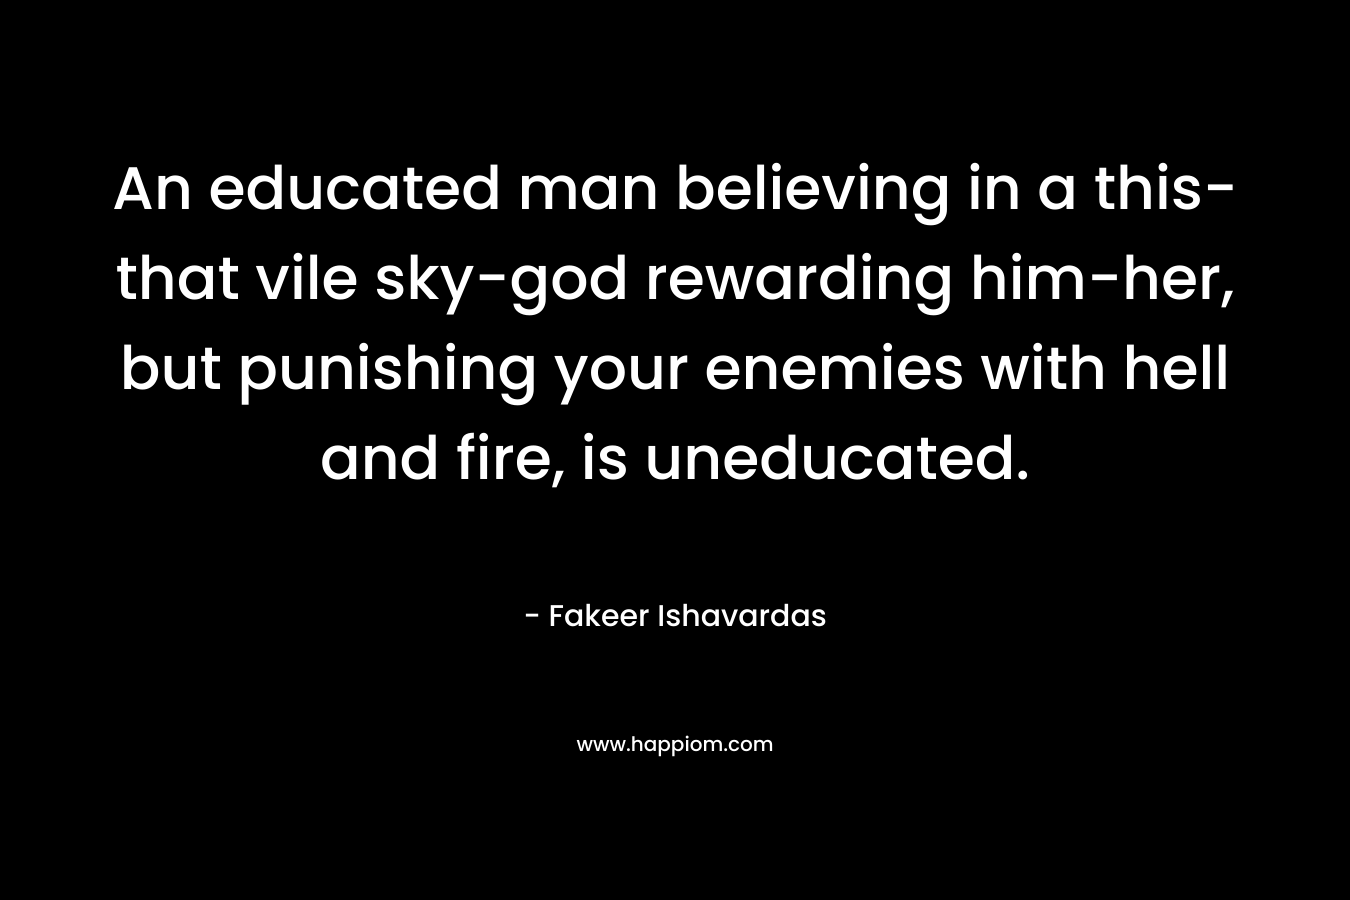 An educated man believing in a this-that vile sky-god rewarding him-her, but punishing your enemies with hell and fire, is uneducated.